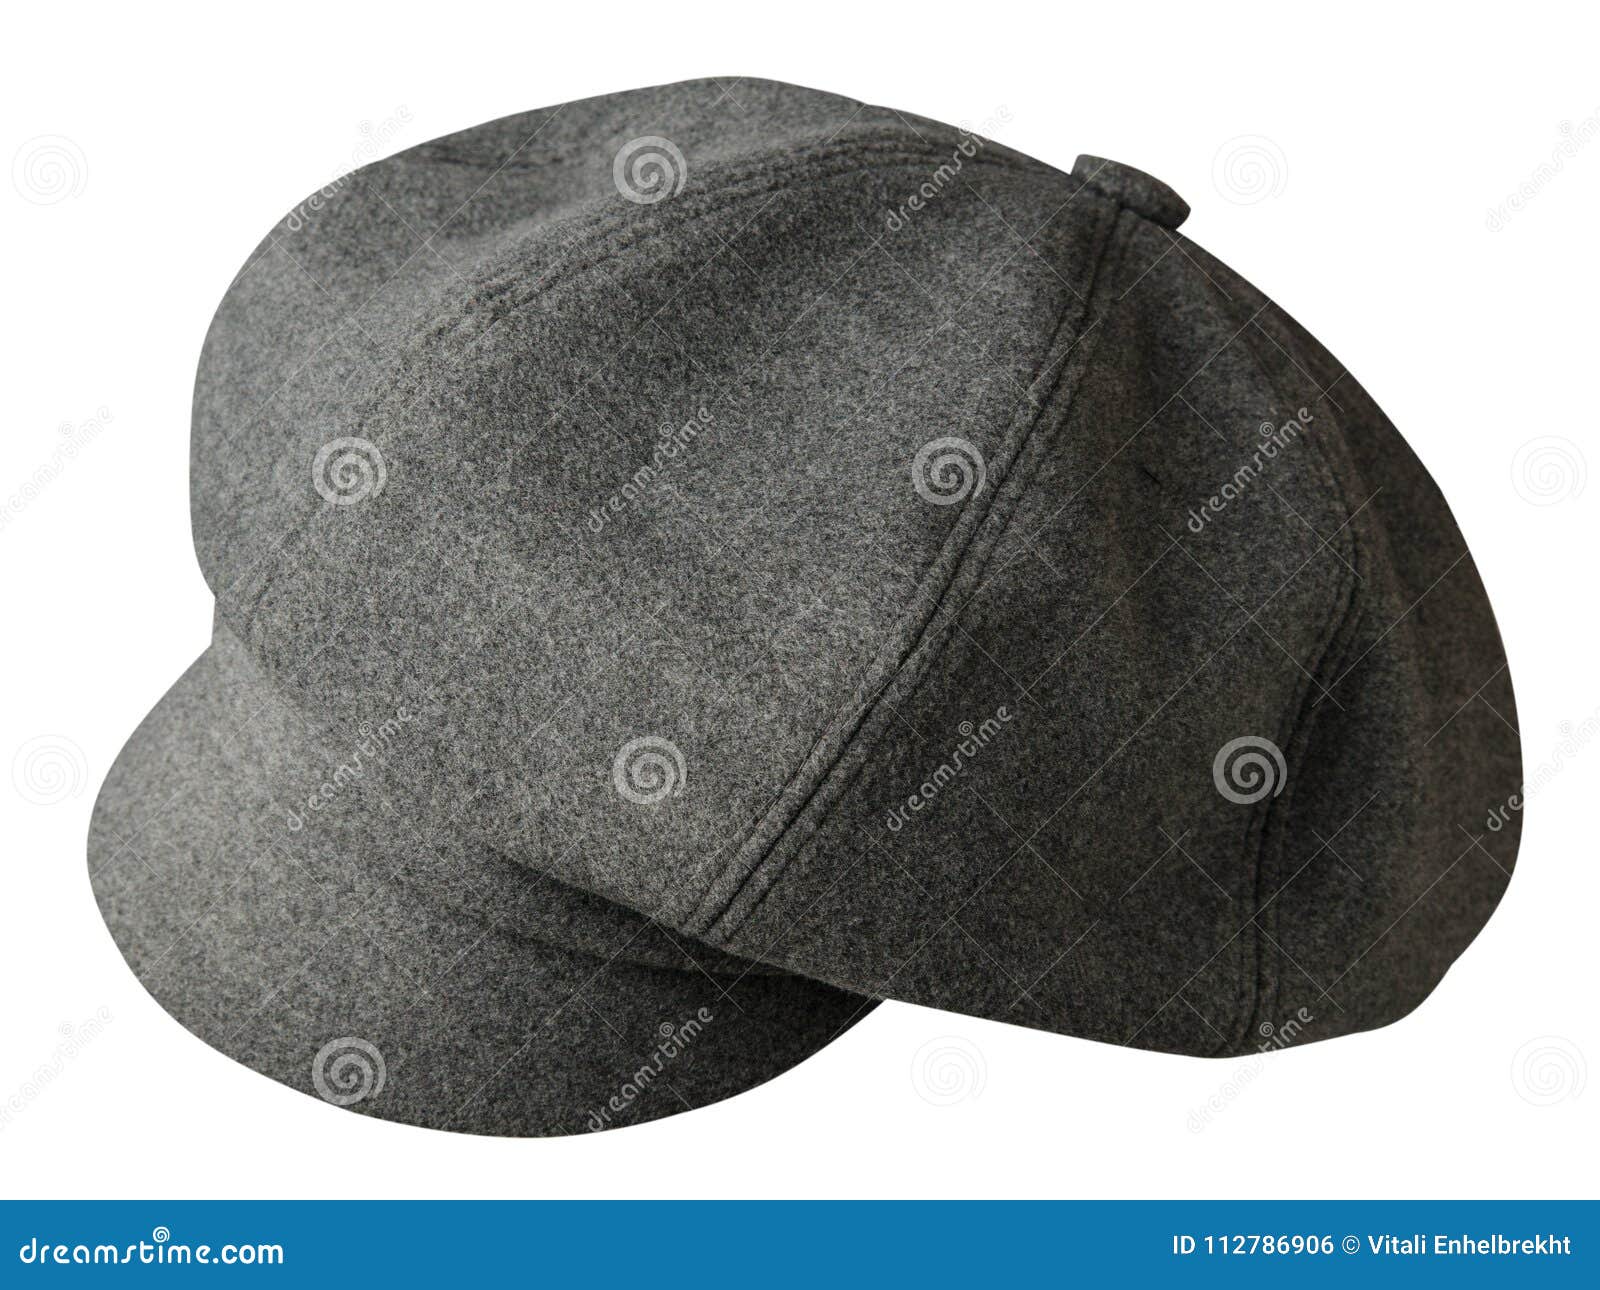 Fashion Hat Isolated On White Background. Colored Hat Stock Photo ...